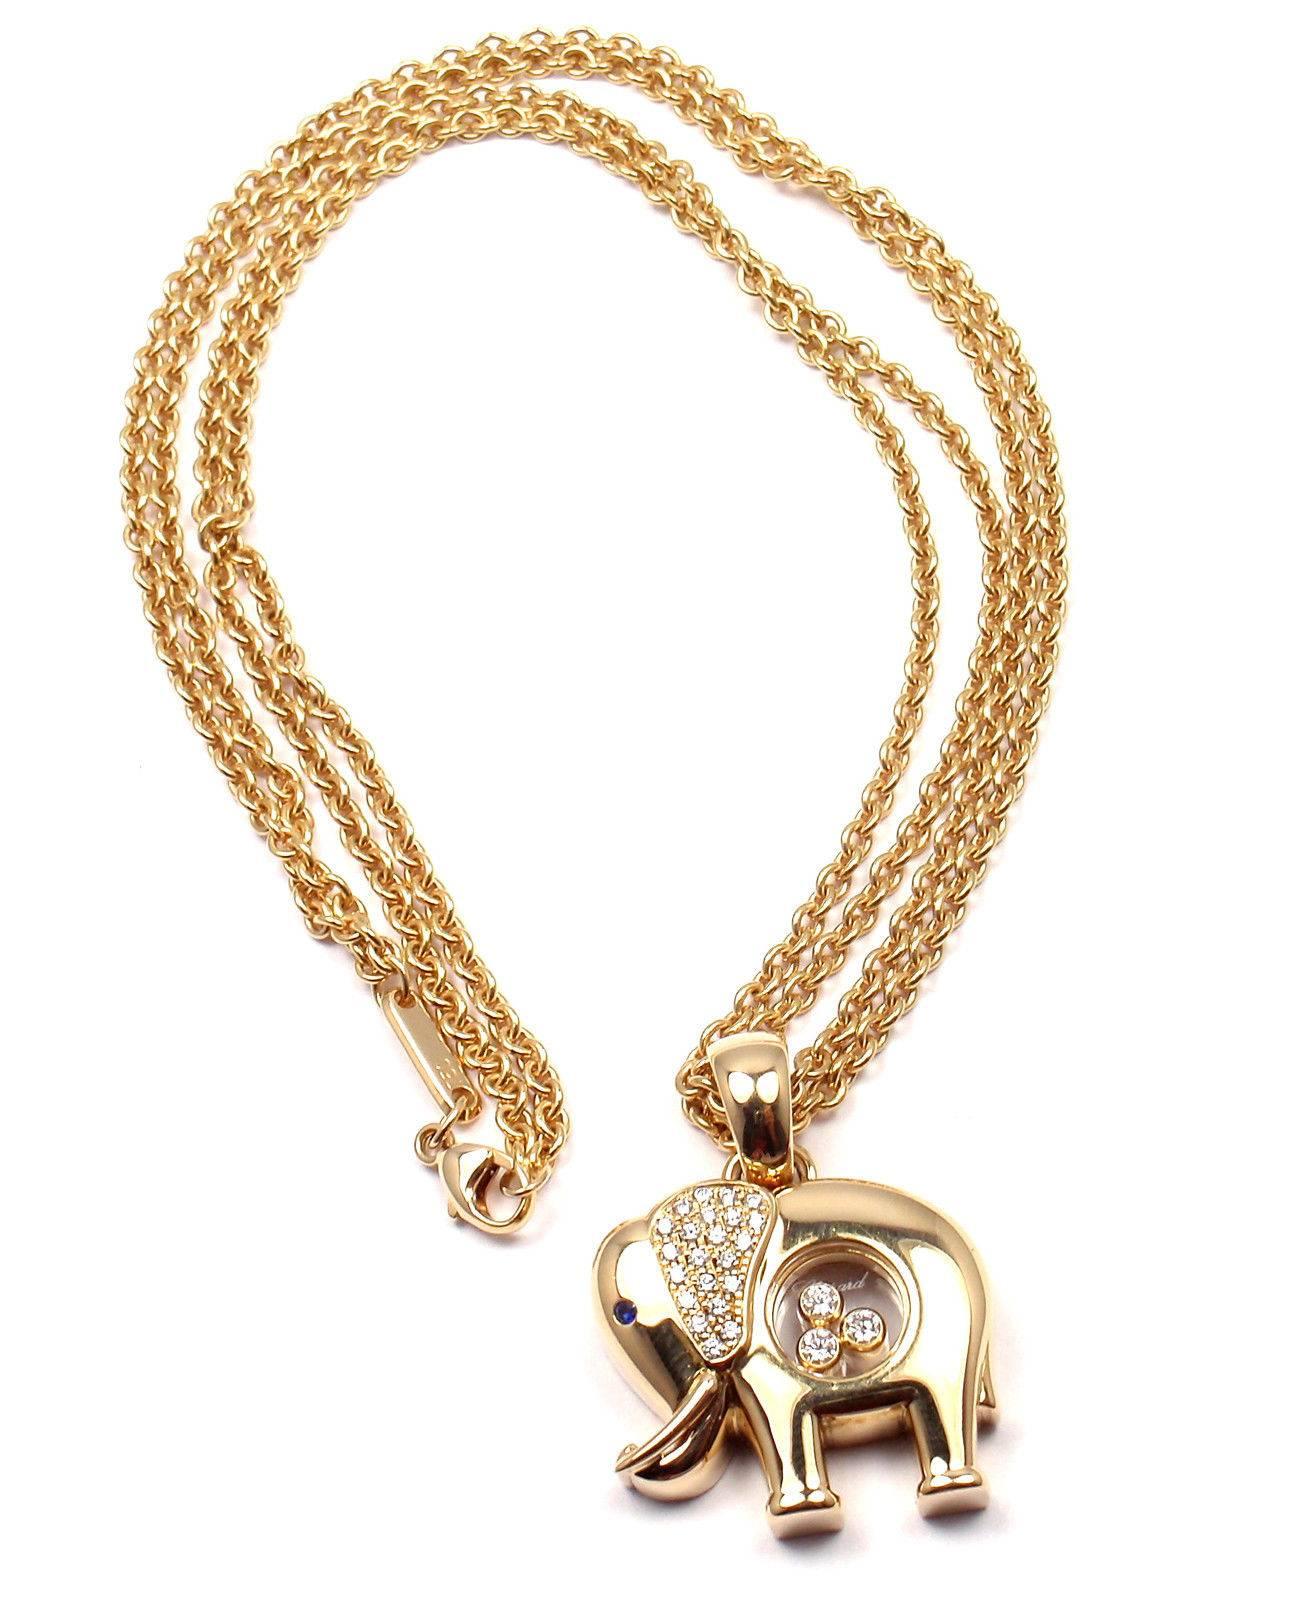 18k Yellow Gold Happy Elephant Diamond And Sapphires Pendant Necklace by Chopard.  
With 22 round floating diamonds VS1 clarity, E color total weight approx. .22ct
3 round brilliant cut floating diamonds VS1 clarity, E color total weight .15ct
1